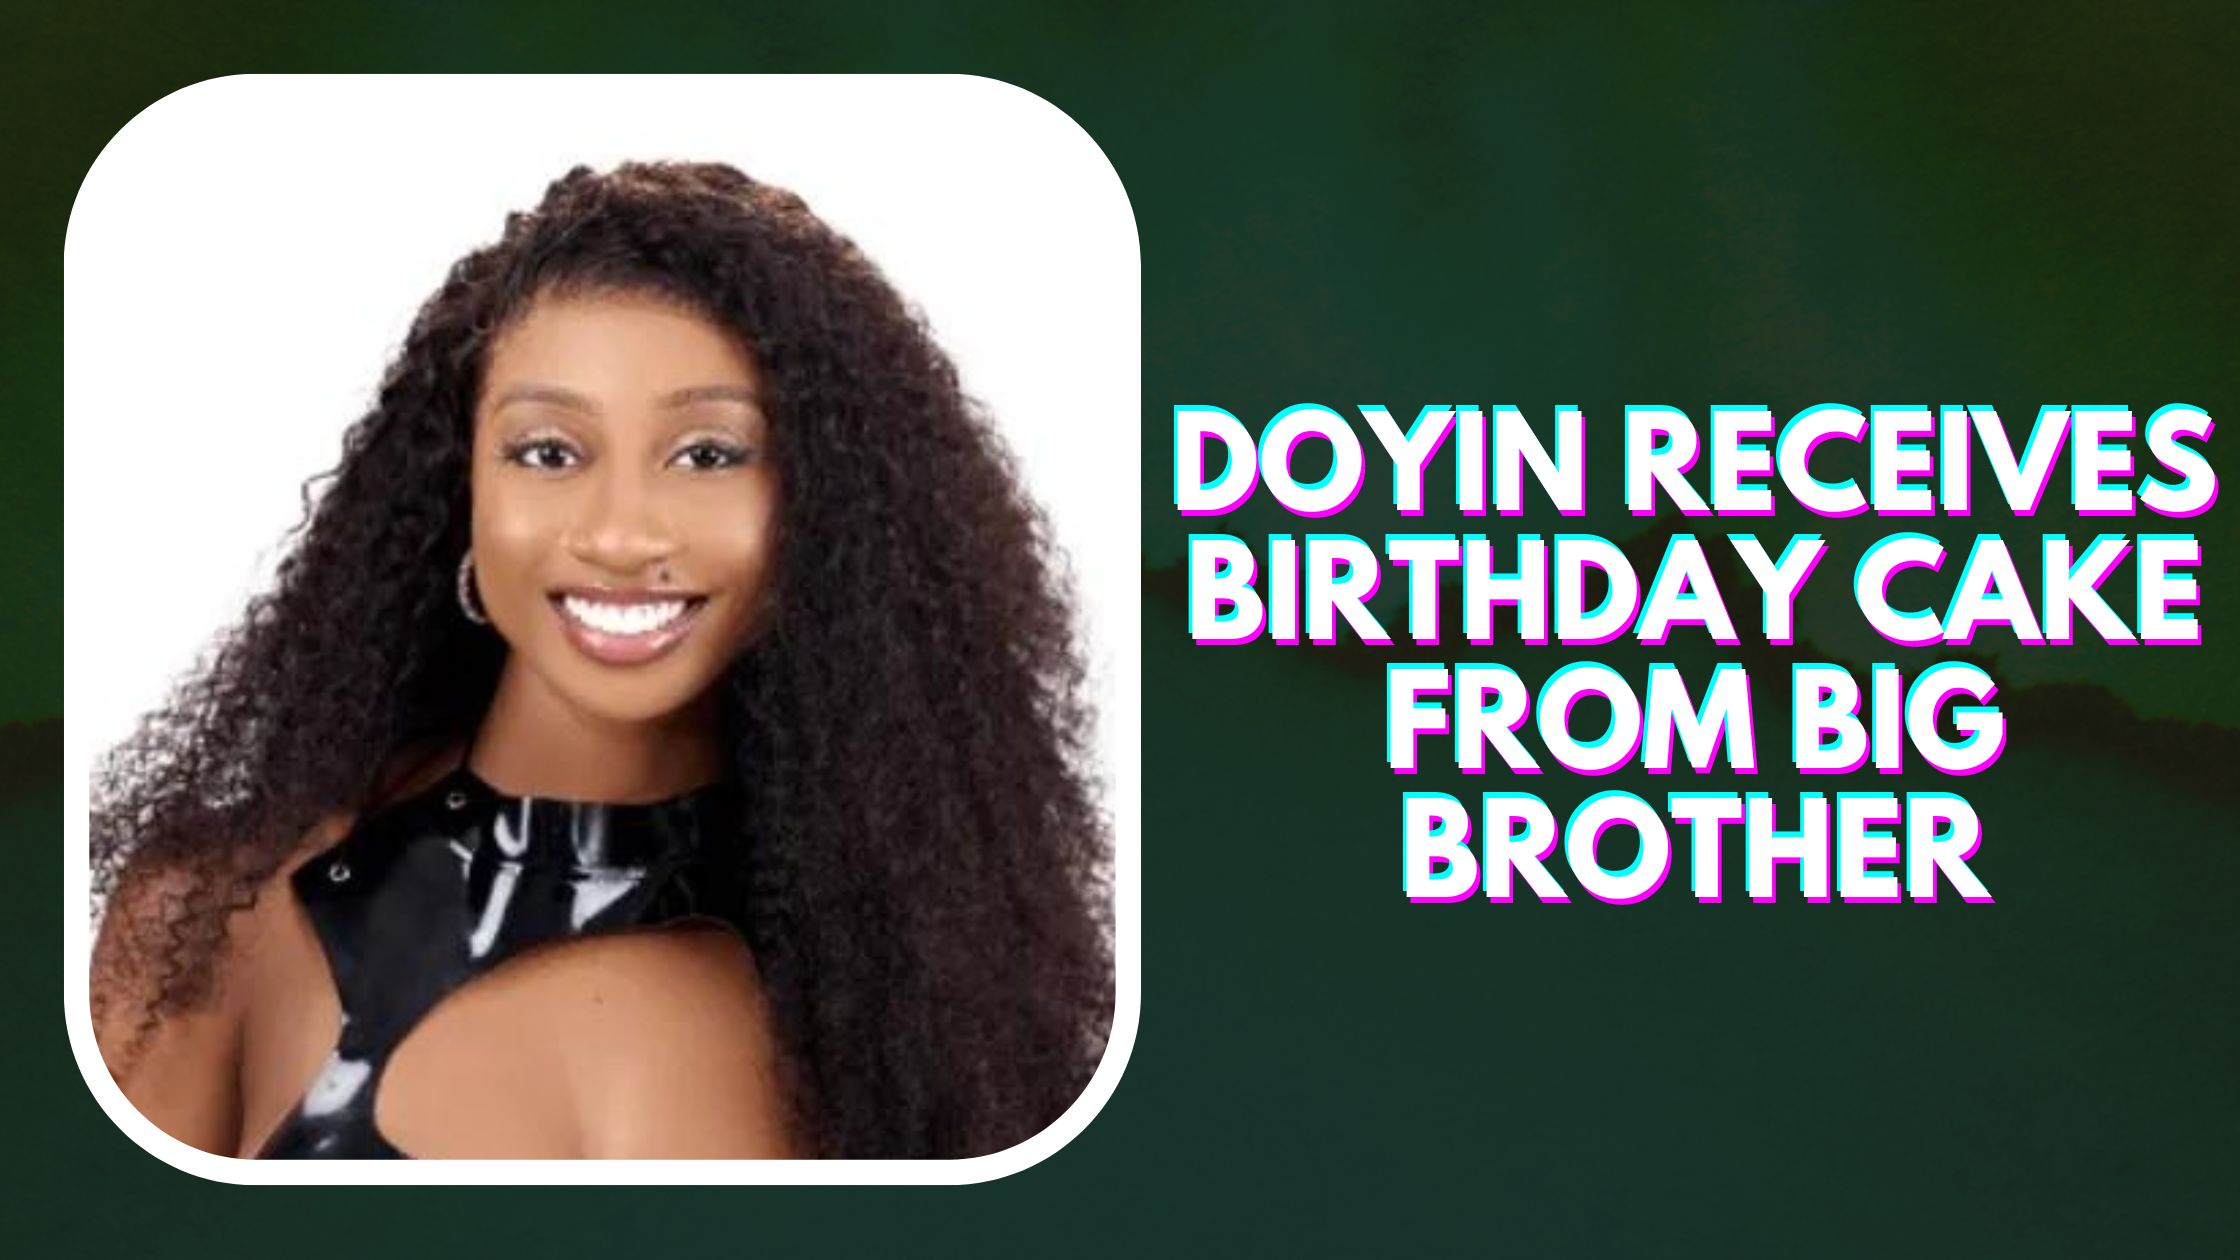 Doyin Receives Birthday Cake From Big Brother